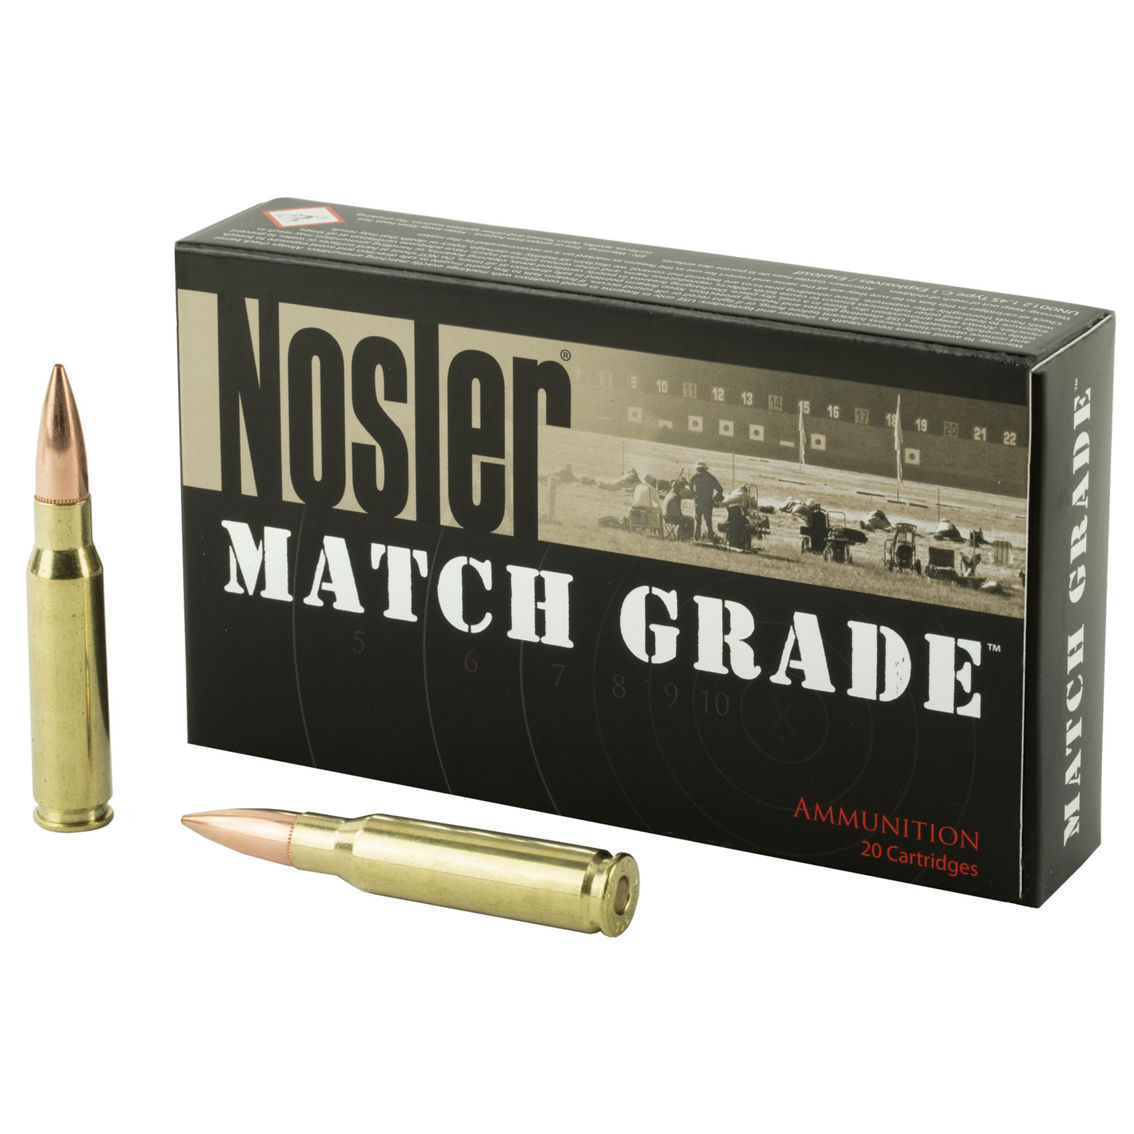 Nosler Match Grade .308 Win 165 Gr. Custom Competition, 20 Rounds - Image 2 of 3